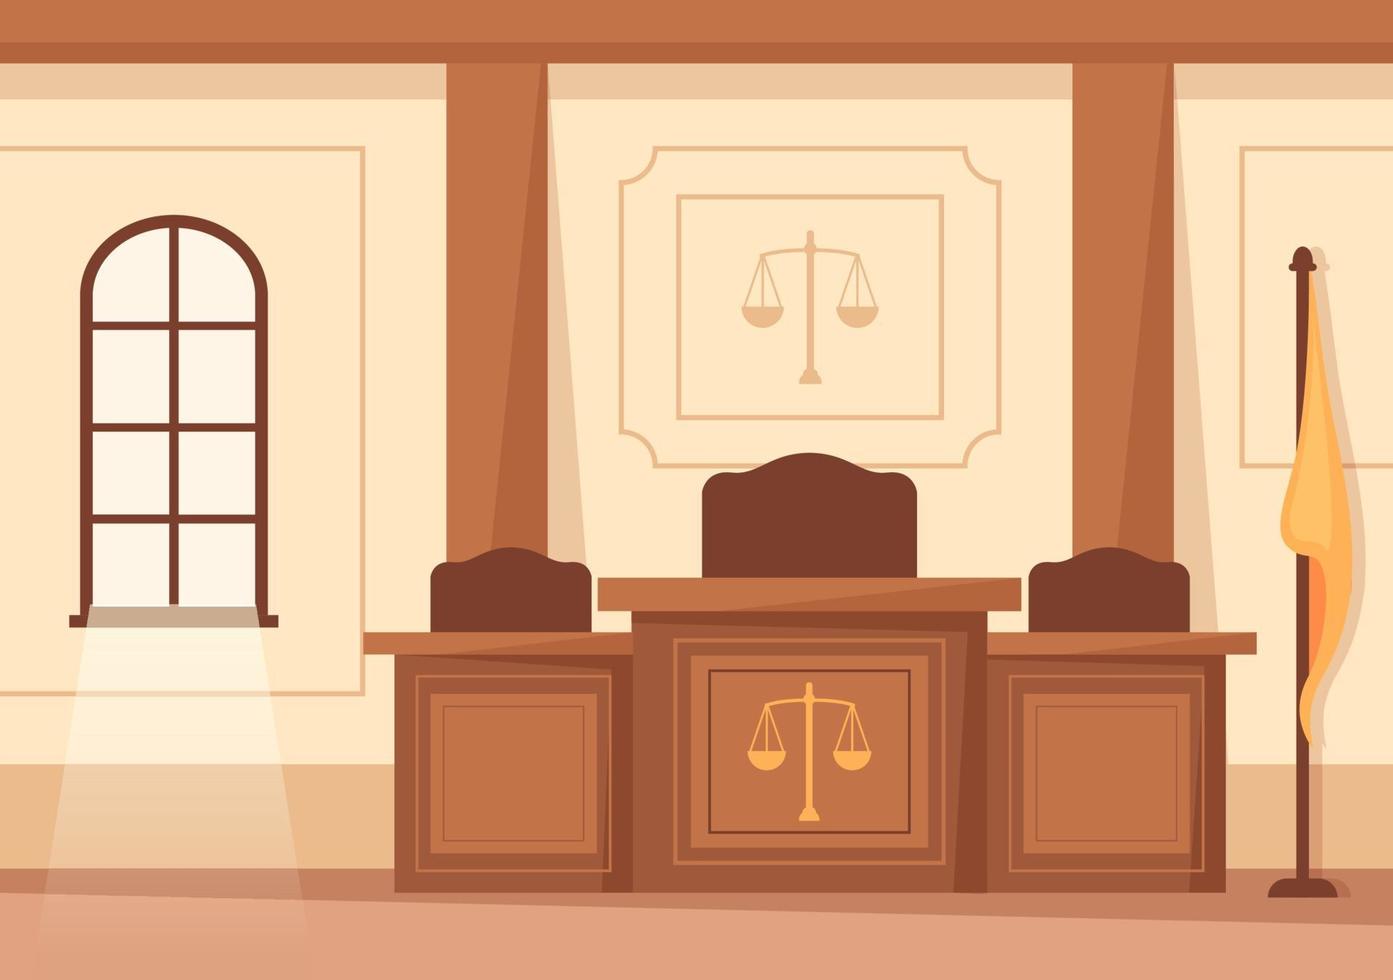 Court Room Interior with Judge or Jury Table, Flag and Wooden Judge's Hammer in Flat Cartoon Design Illustration vector